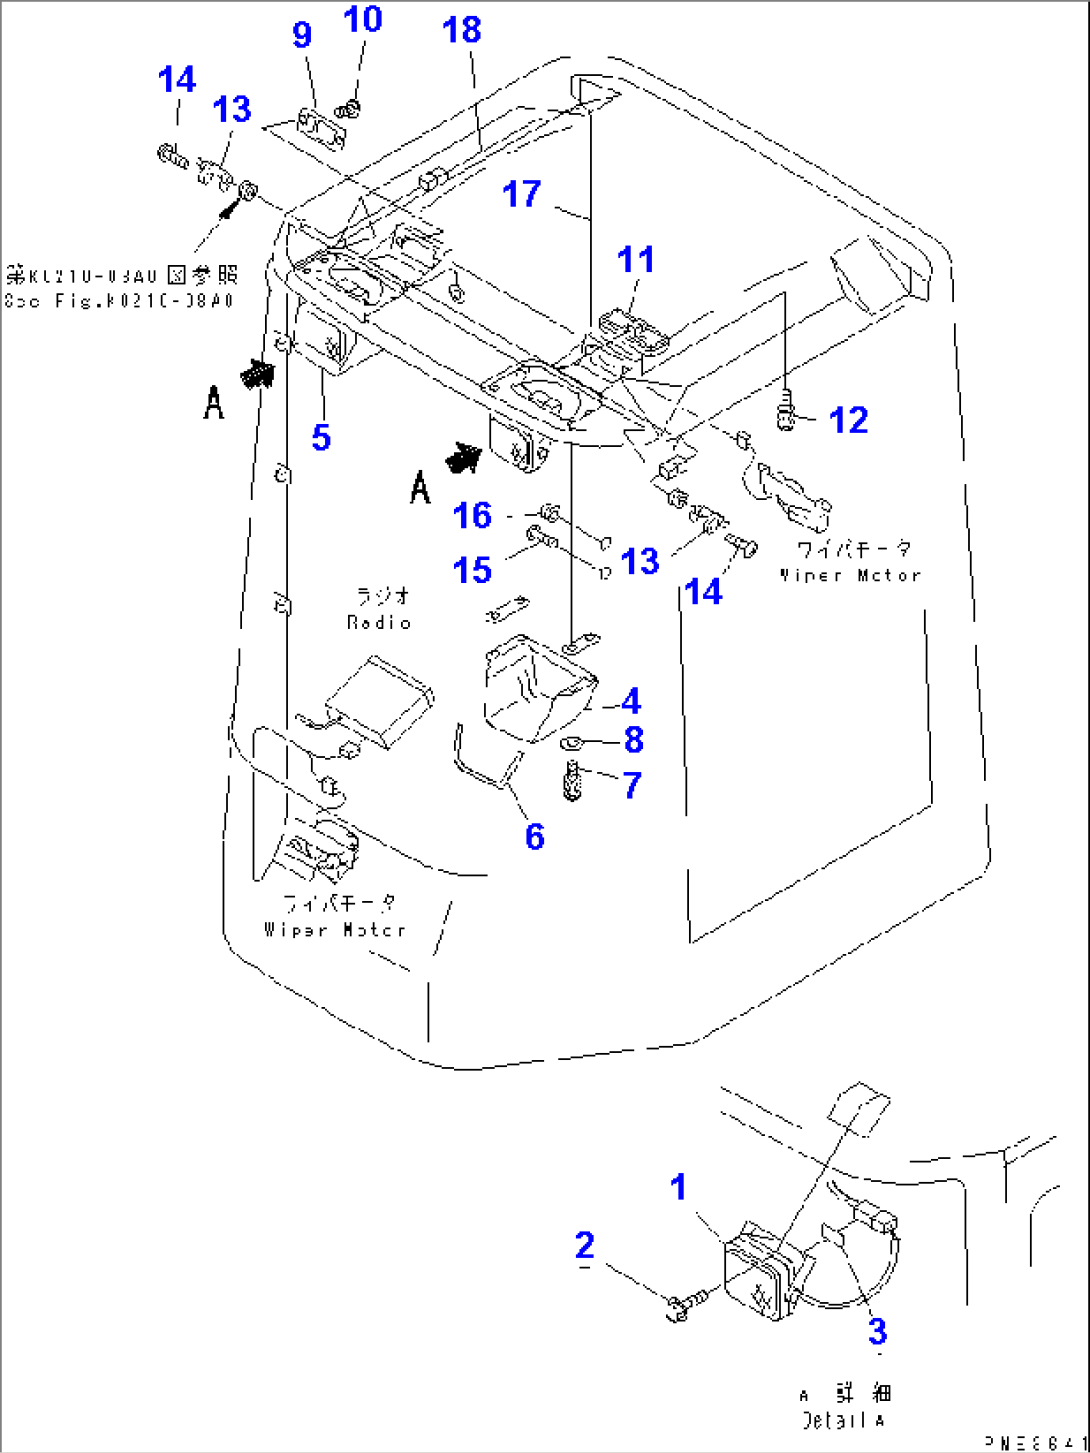 ROPS CAB (ELECTRICAL SYSTEM)(#64001-)